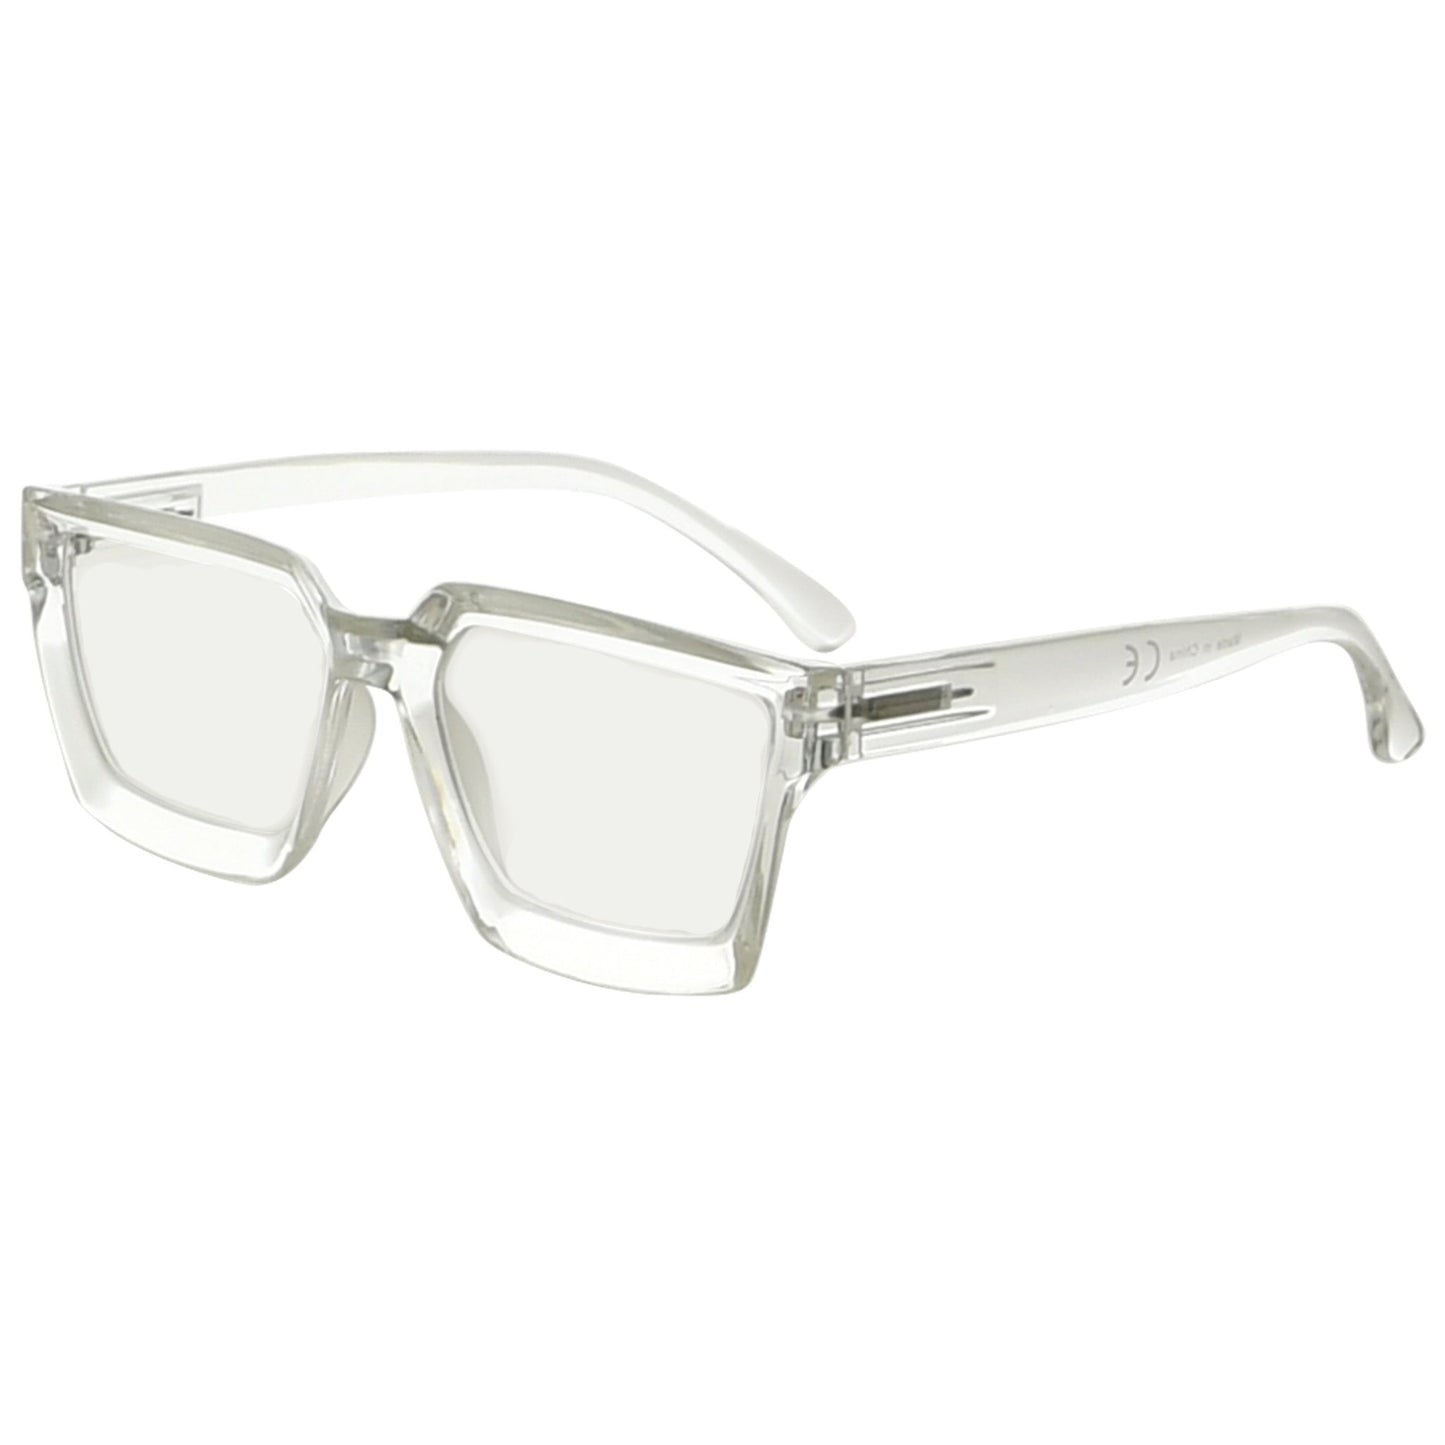 Stylish Reading Glasses for Women Clear M2003